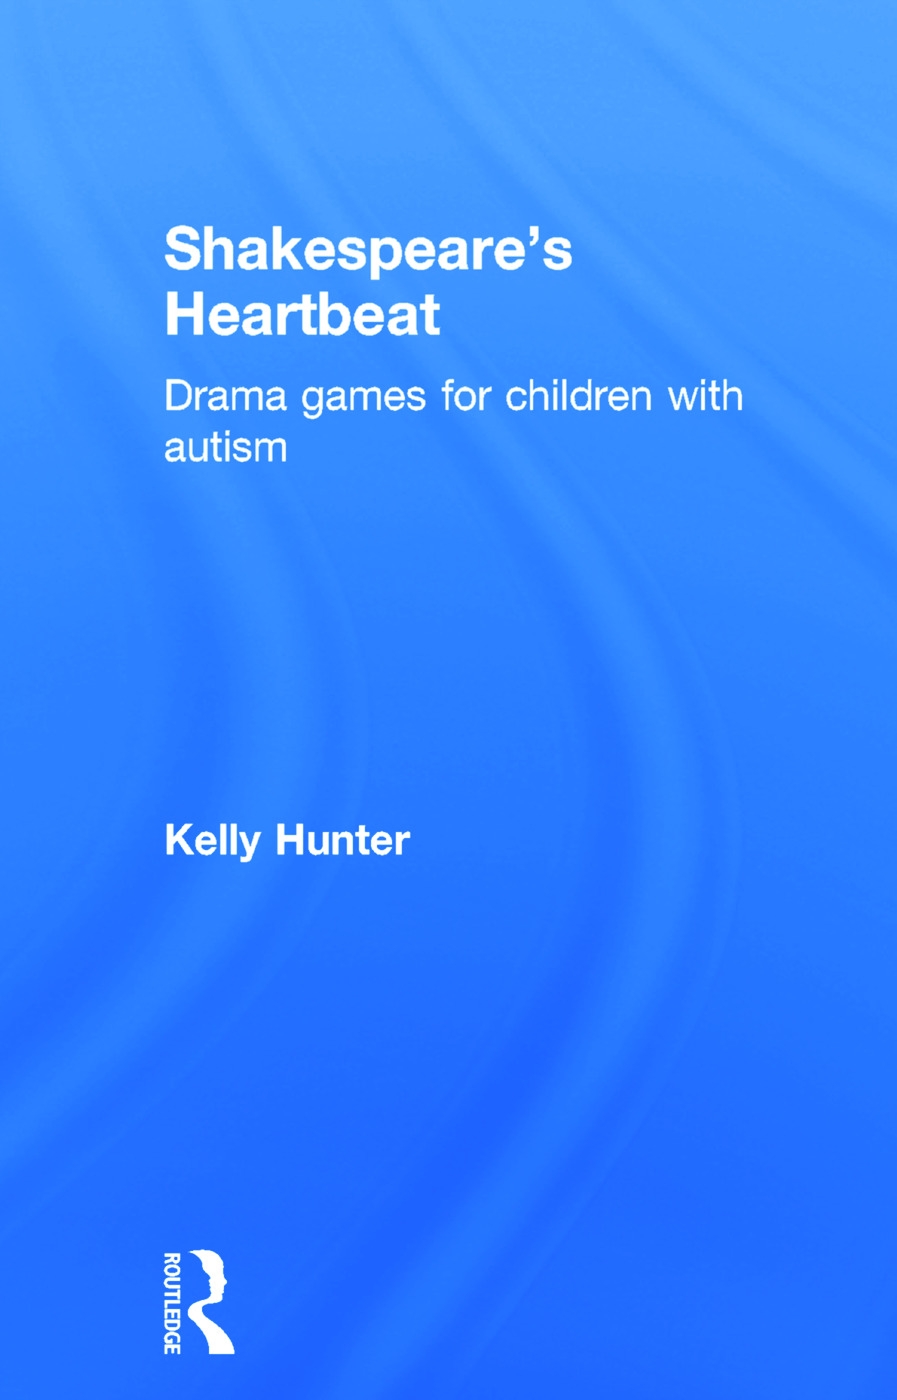 Shakespeare’s Heartbeat: Drama Games for Children with Autism